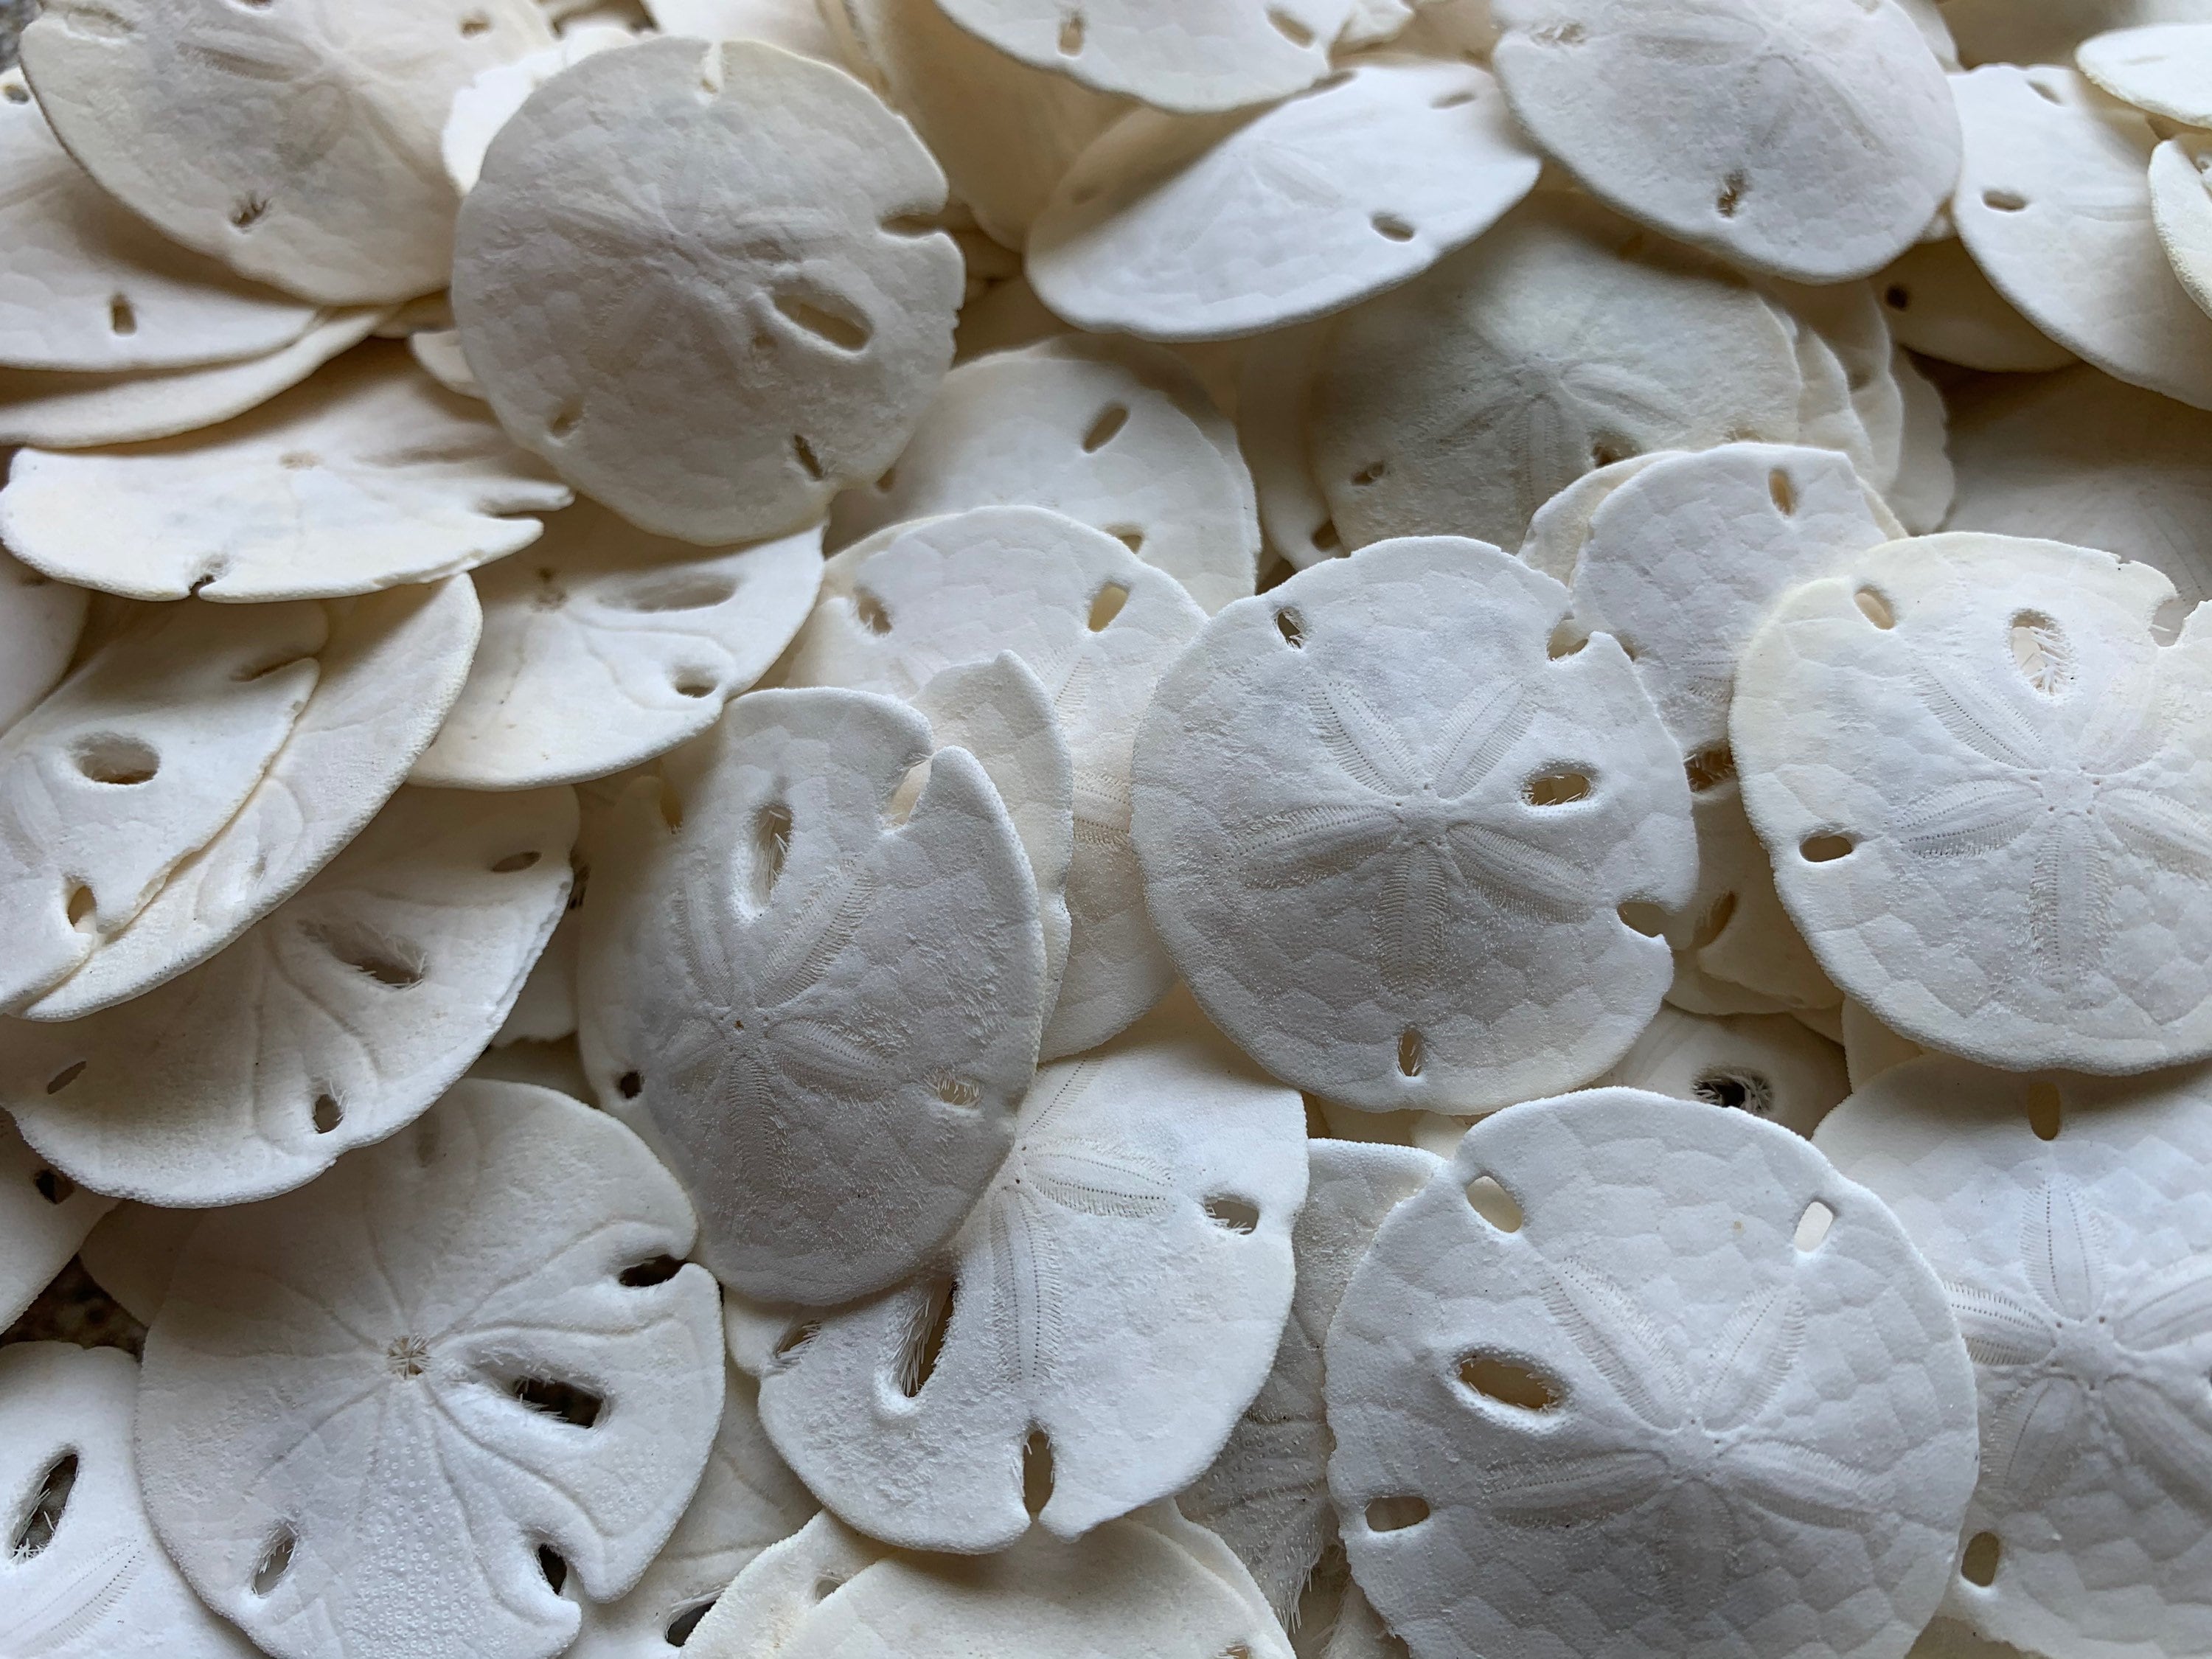 Sand Dollars 3-3.5 - 15pcs - Wedding Seashell Sand Dollar for Crafts - Bulk Sandollars Hand Picked and Packed by Tumbler Home in Florida